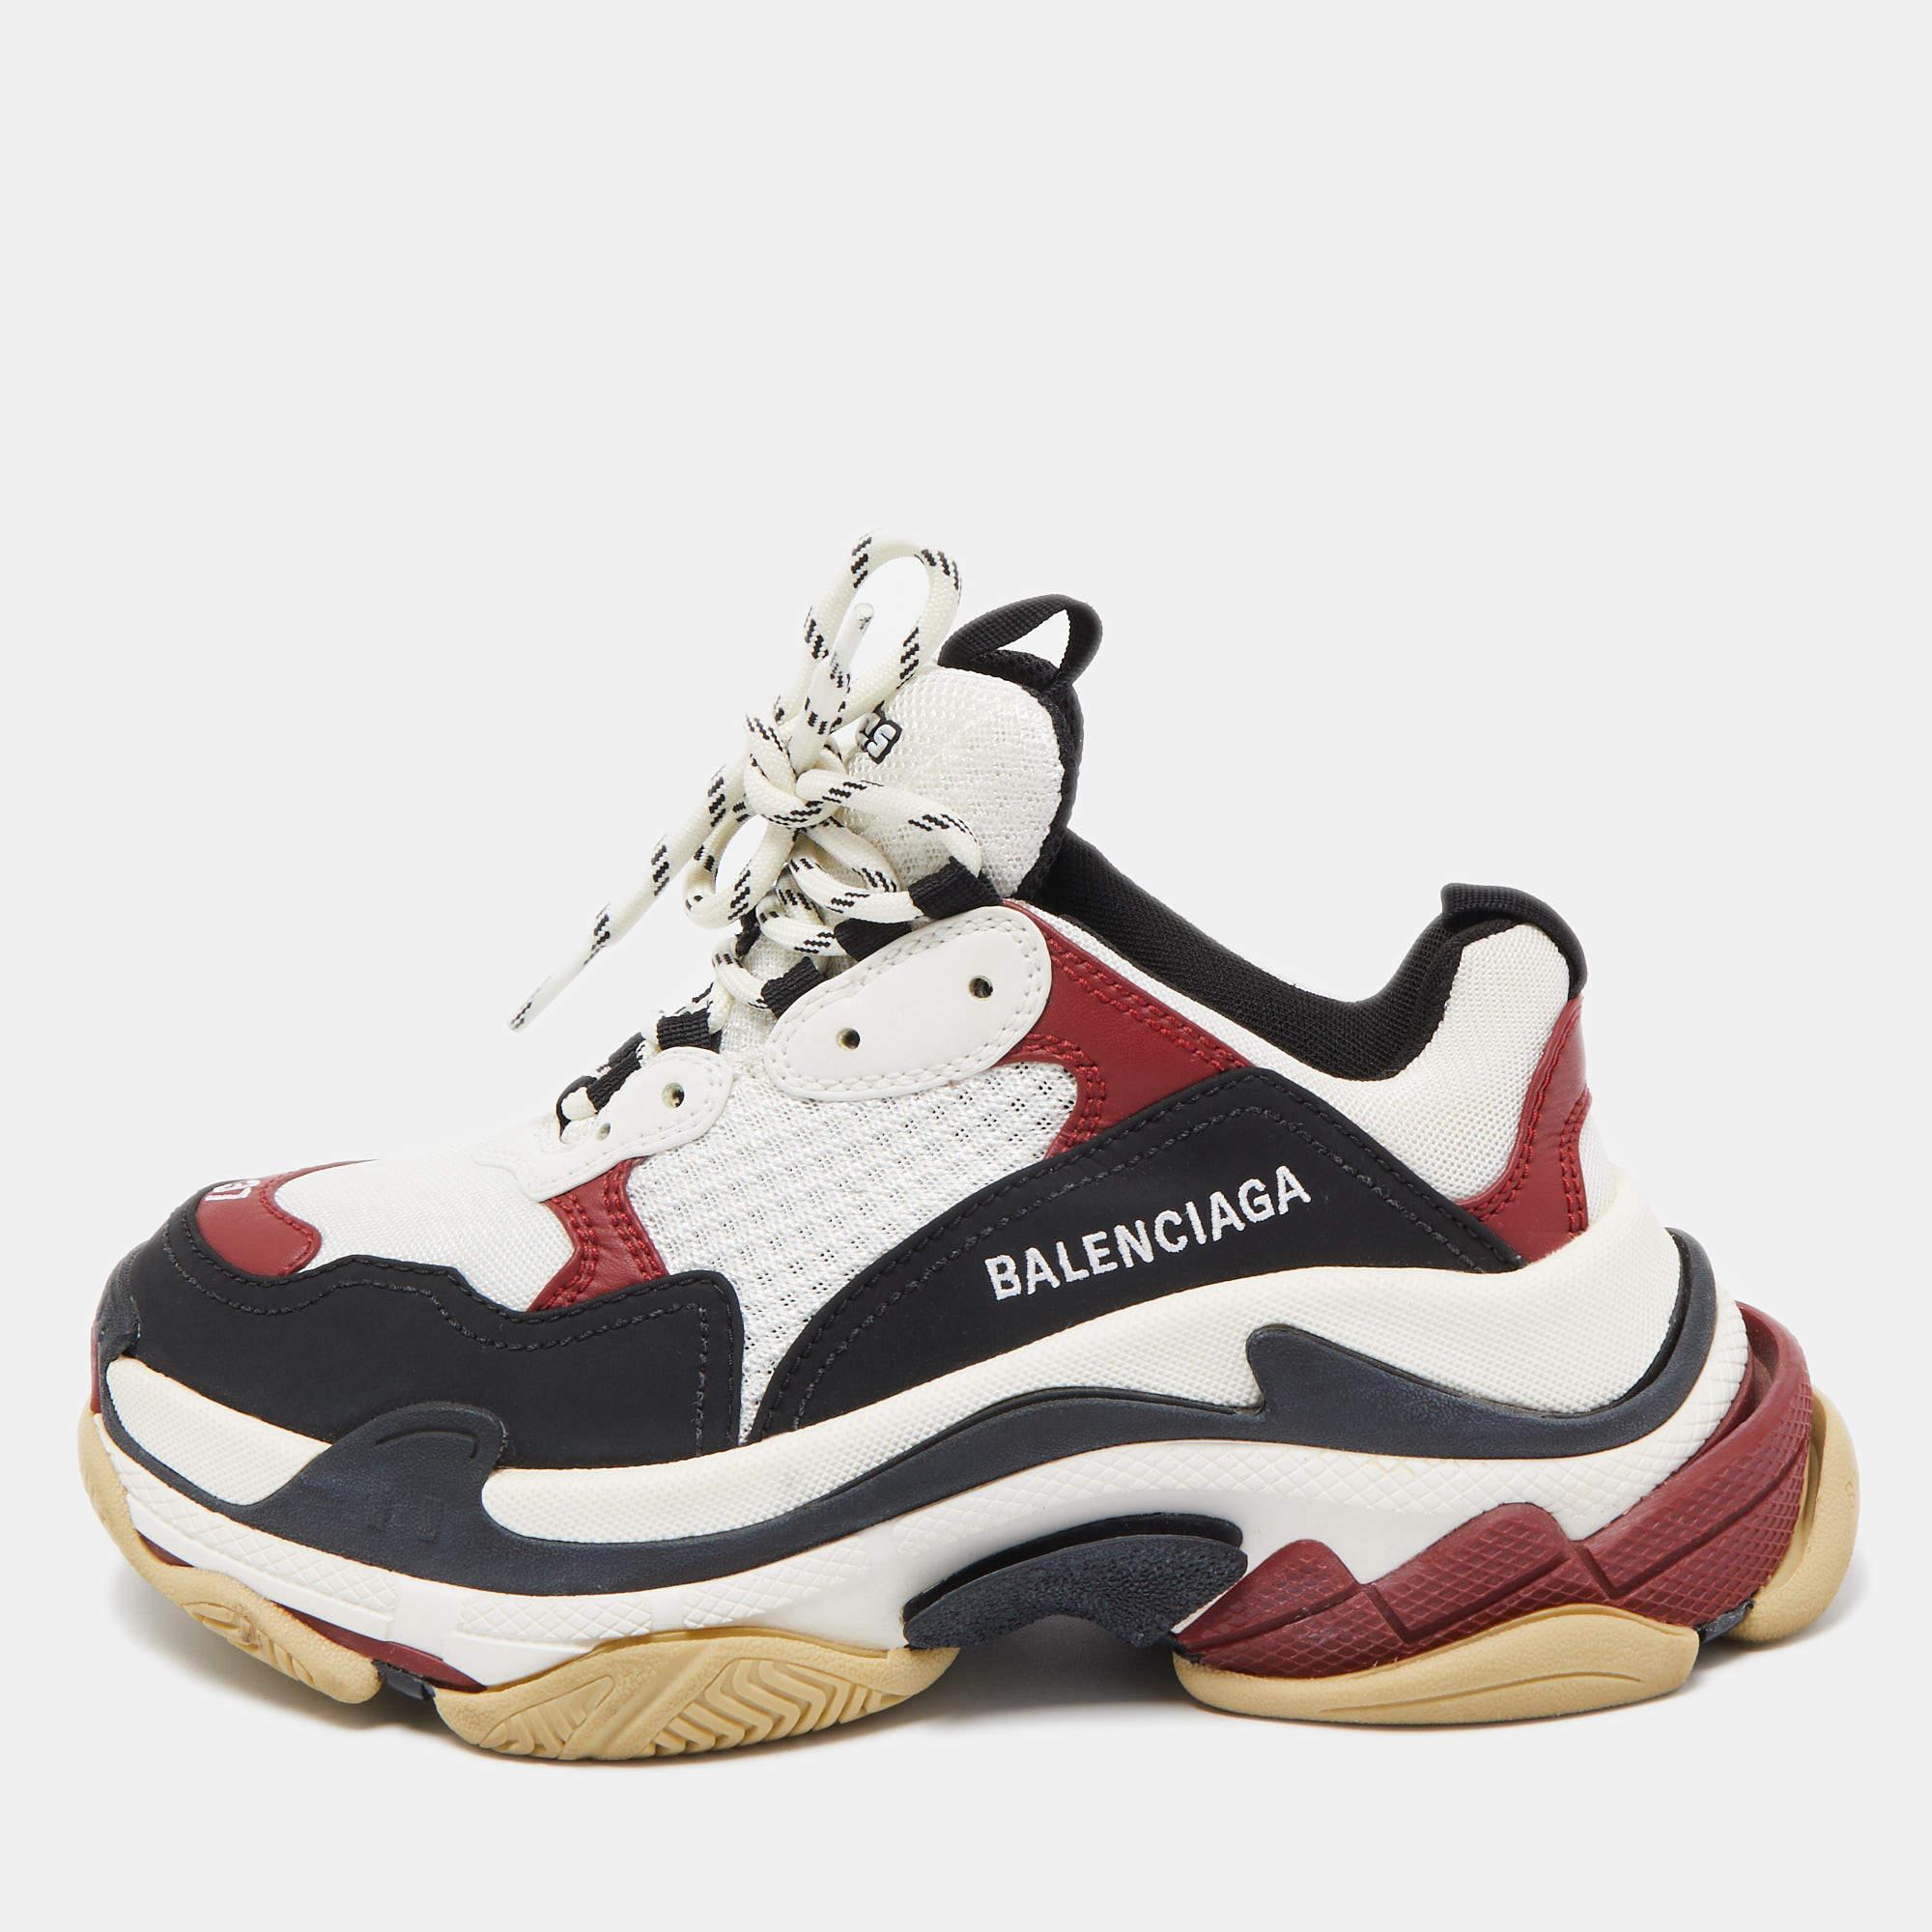 Balenciaga Tricolor Nubuck Leather and Mesh Triple S Low Top Sneakers Size 37 3